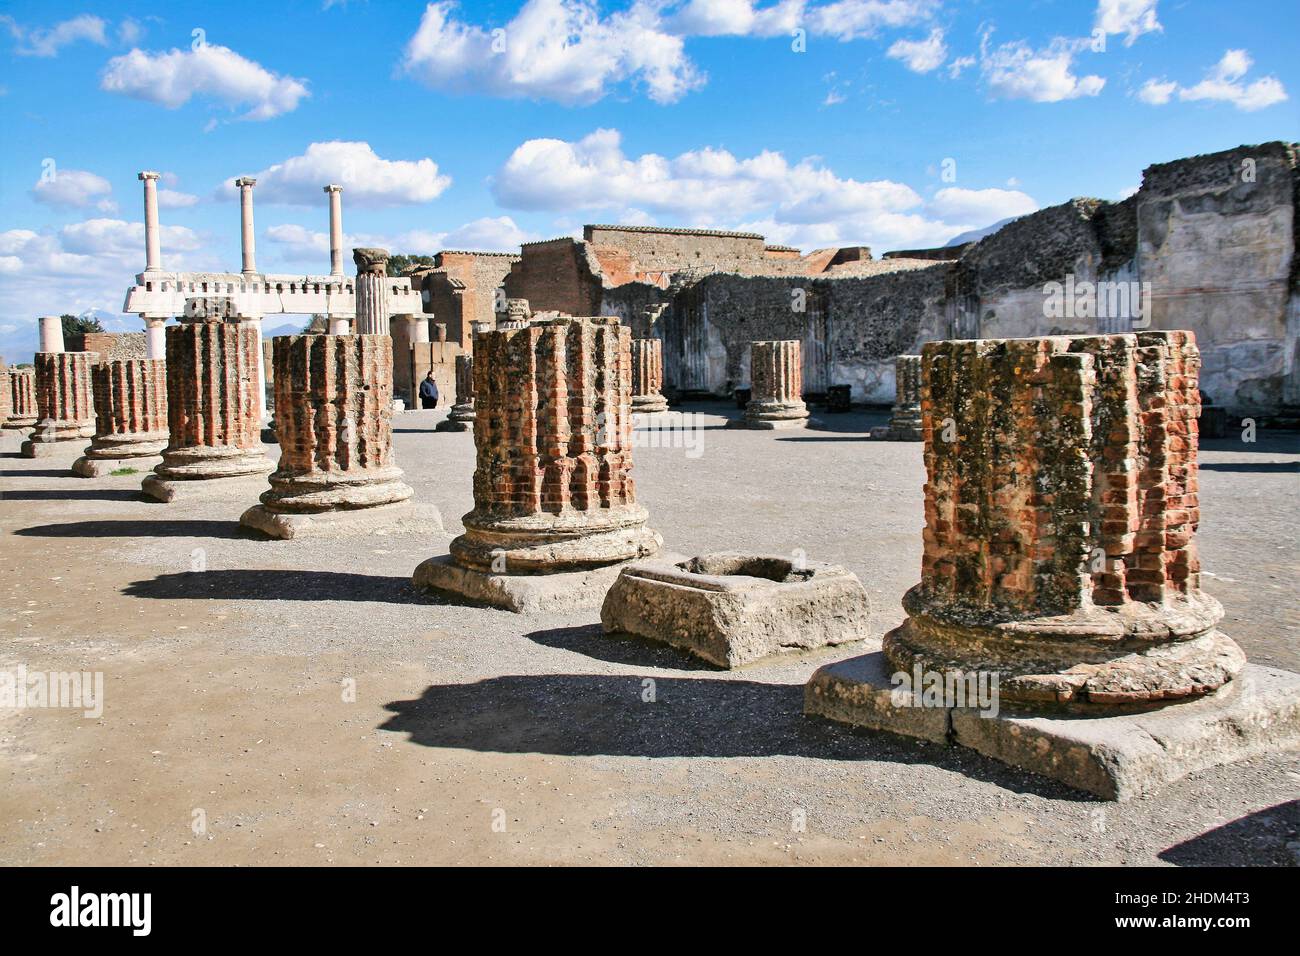 Shot from the ruins of the roman city of Pompeii, destroyed by a volcanic eruption. Stock Photo